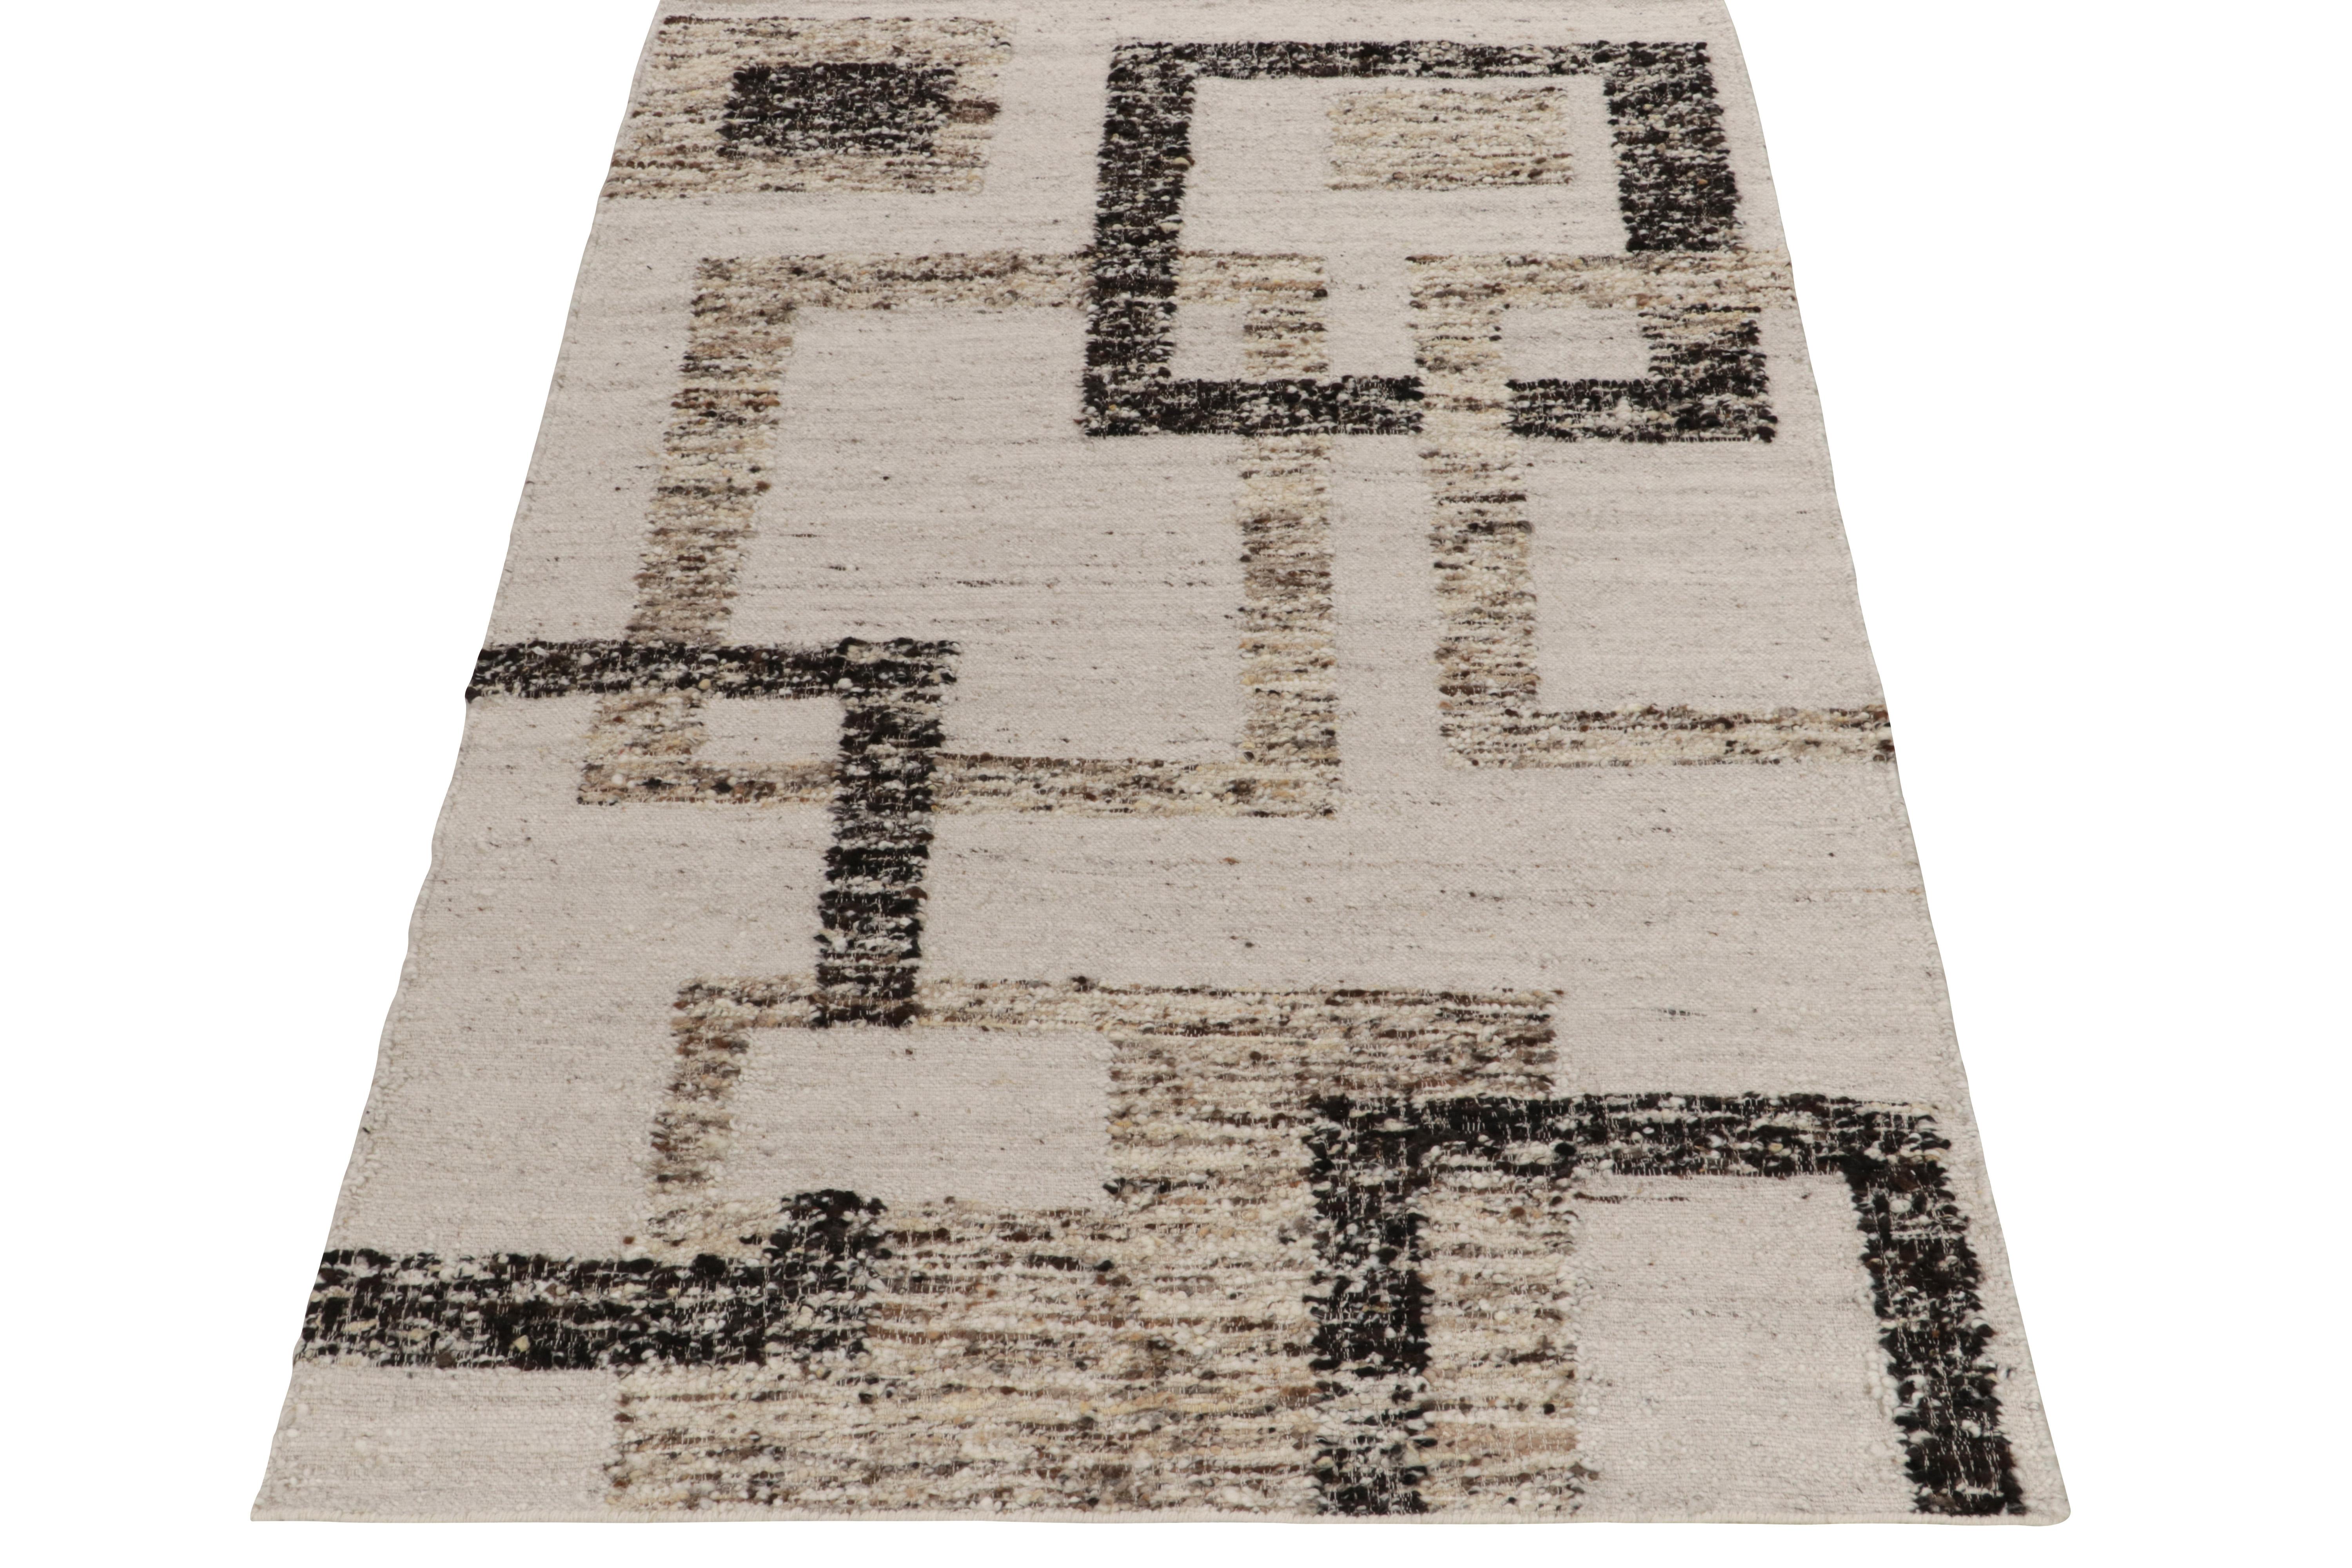 A bold marriage of Art Deco style and innovative texture, Rug & Kilim unveils this contemporary flat weave technique. The 5x8 Kilim rug features overlapping geometric patterns in crisp white, beige-brown and black—a unique play of positive-negative